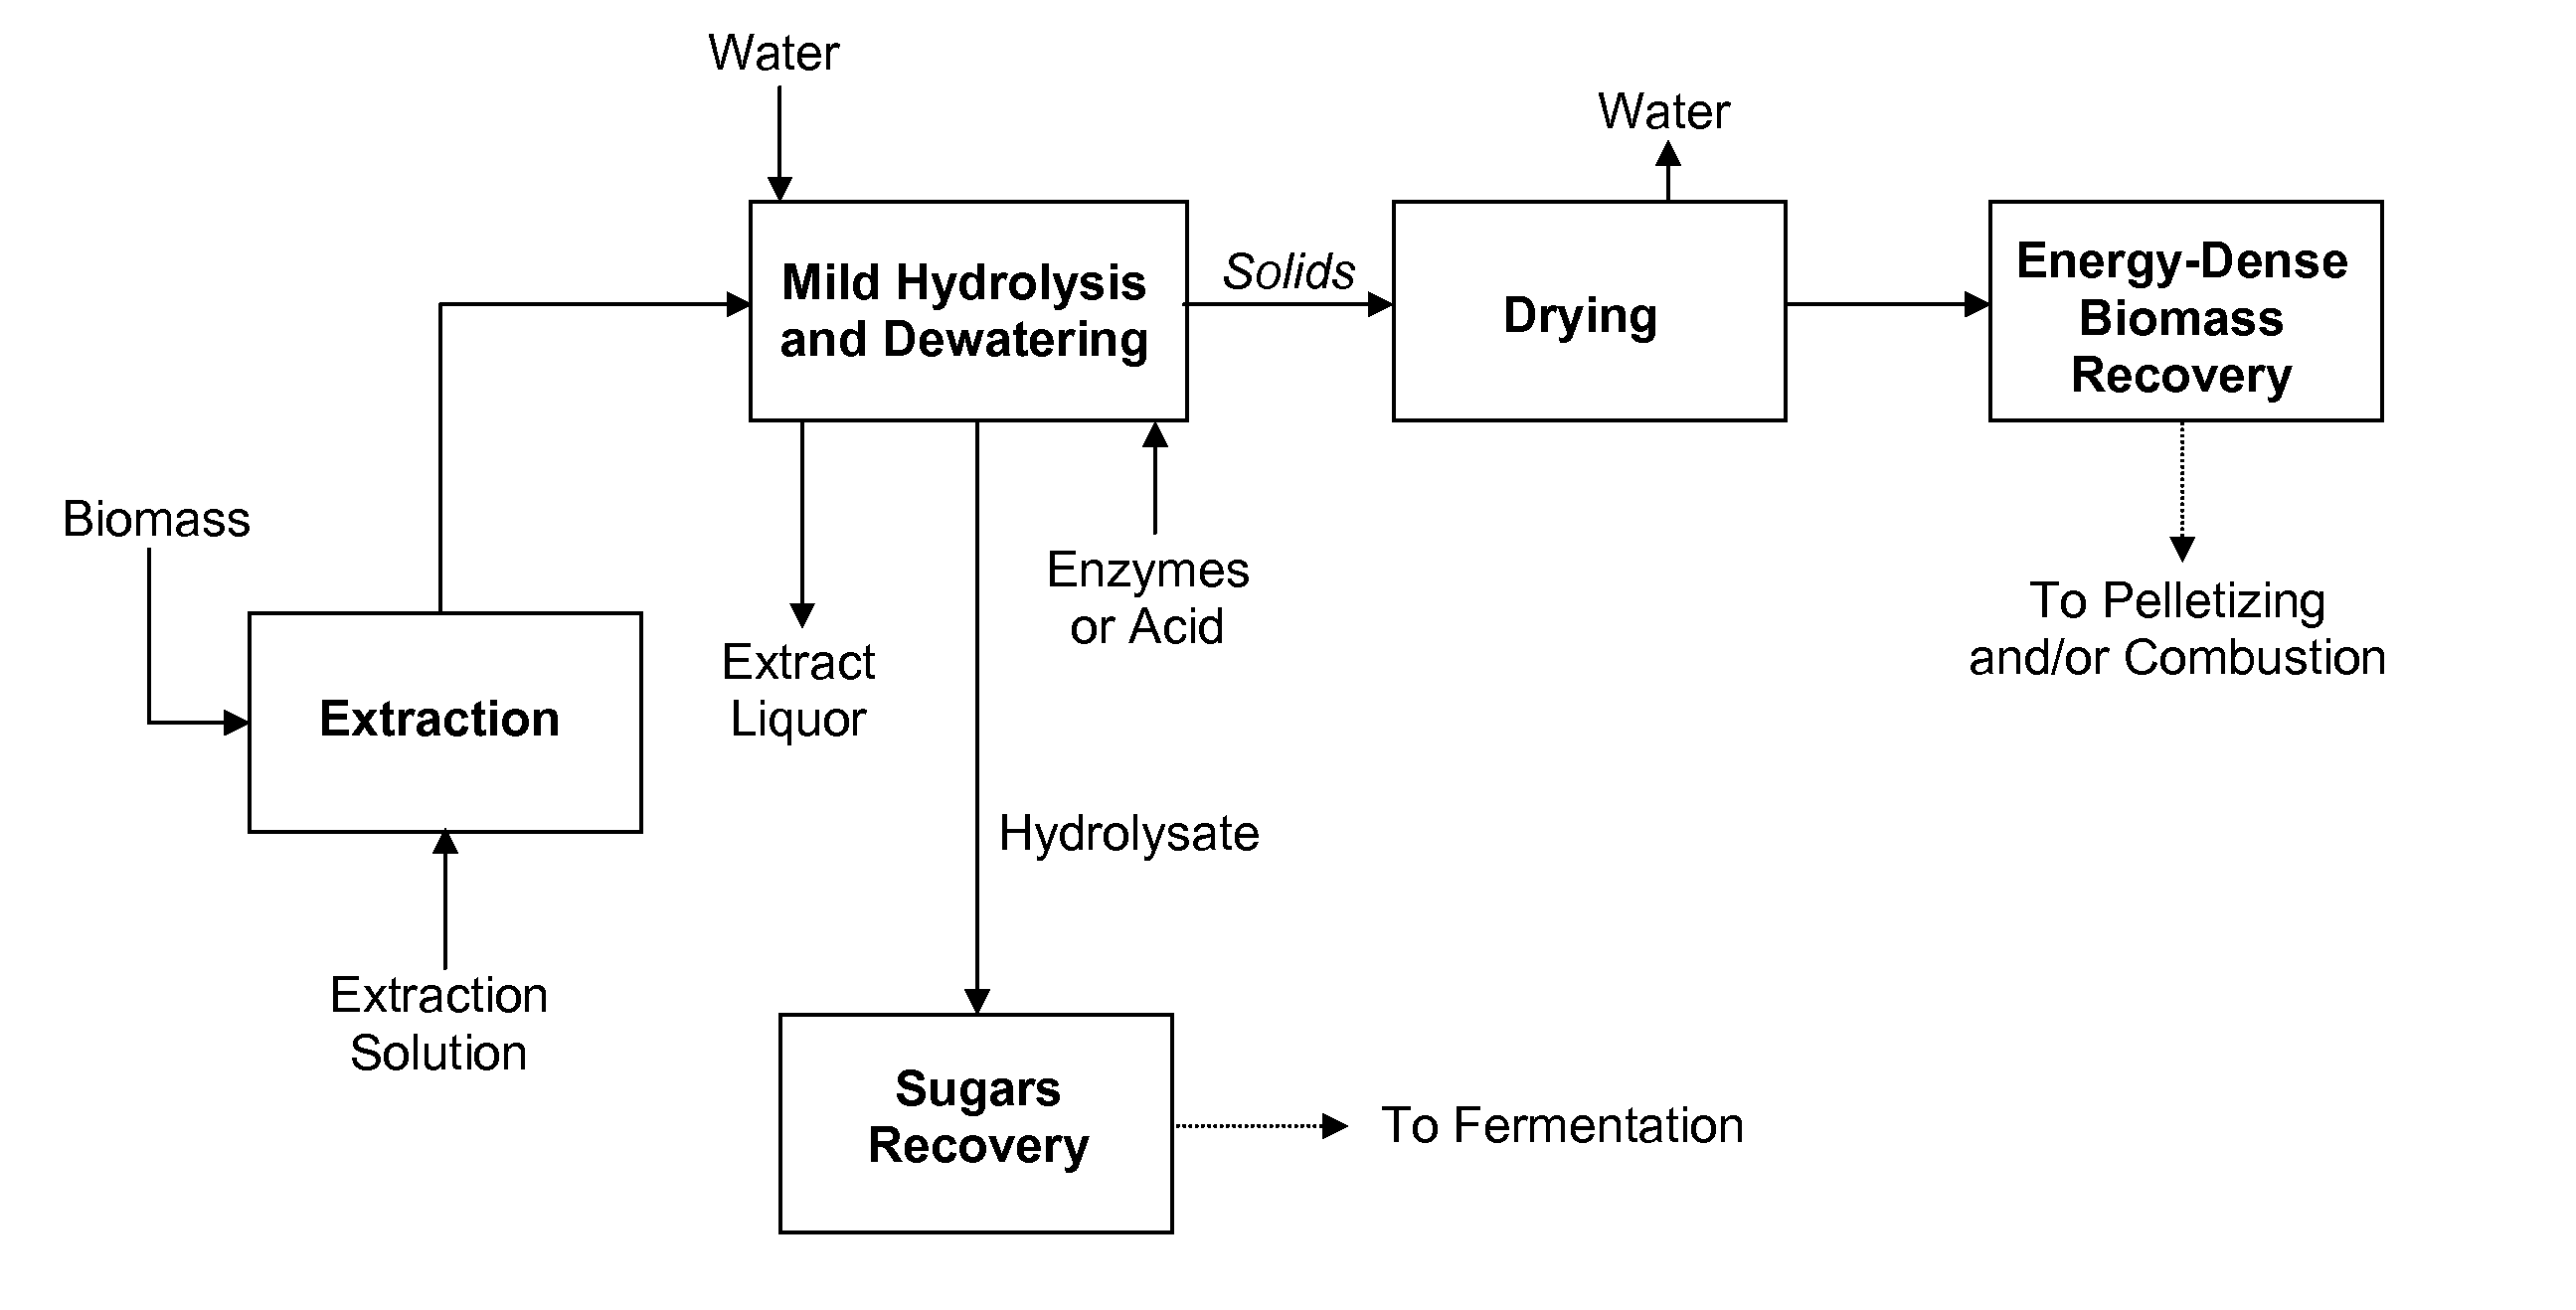 Processes and apparatus for producing energy-dense biomass for combustion and fermentable sugars from the biomass